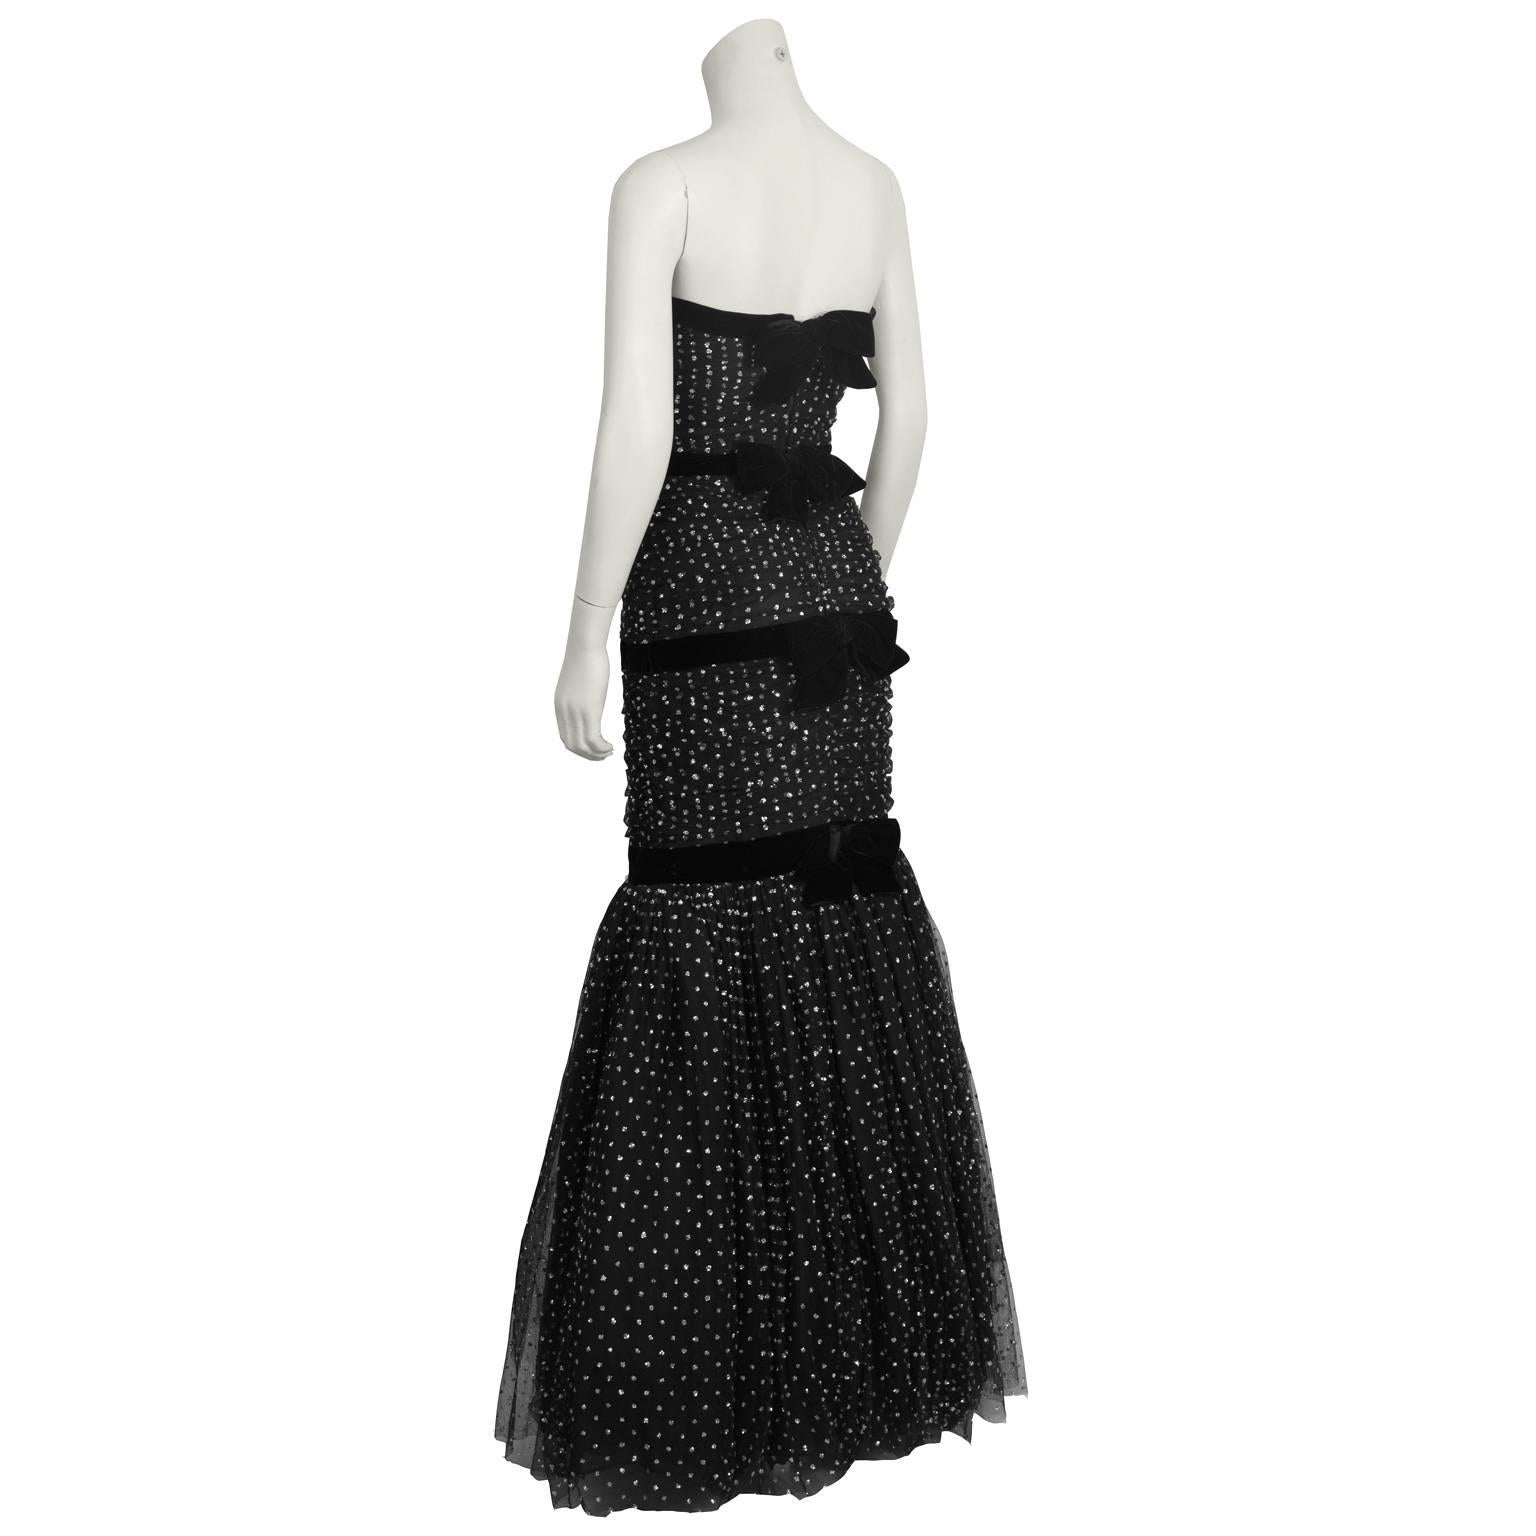 Stunning anonymous black strapless tulle gown from the 1960's dazzles with sparkles throughout. Mermaid cut with ruched black chiffon and a tulle skirt. Three black velvet ribbons trim the top and wrap around the body finishing with bows at the